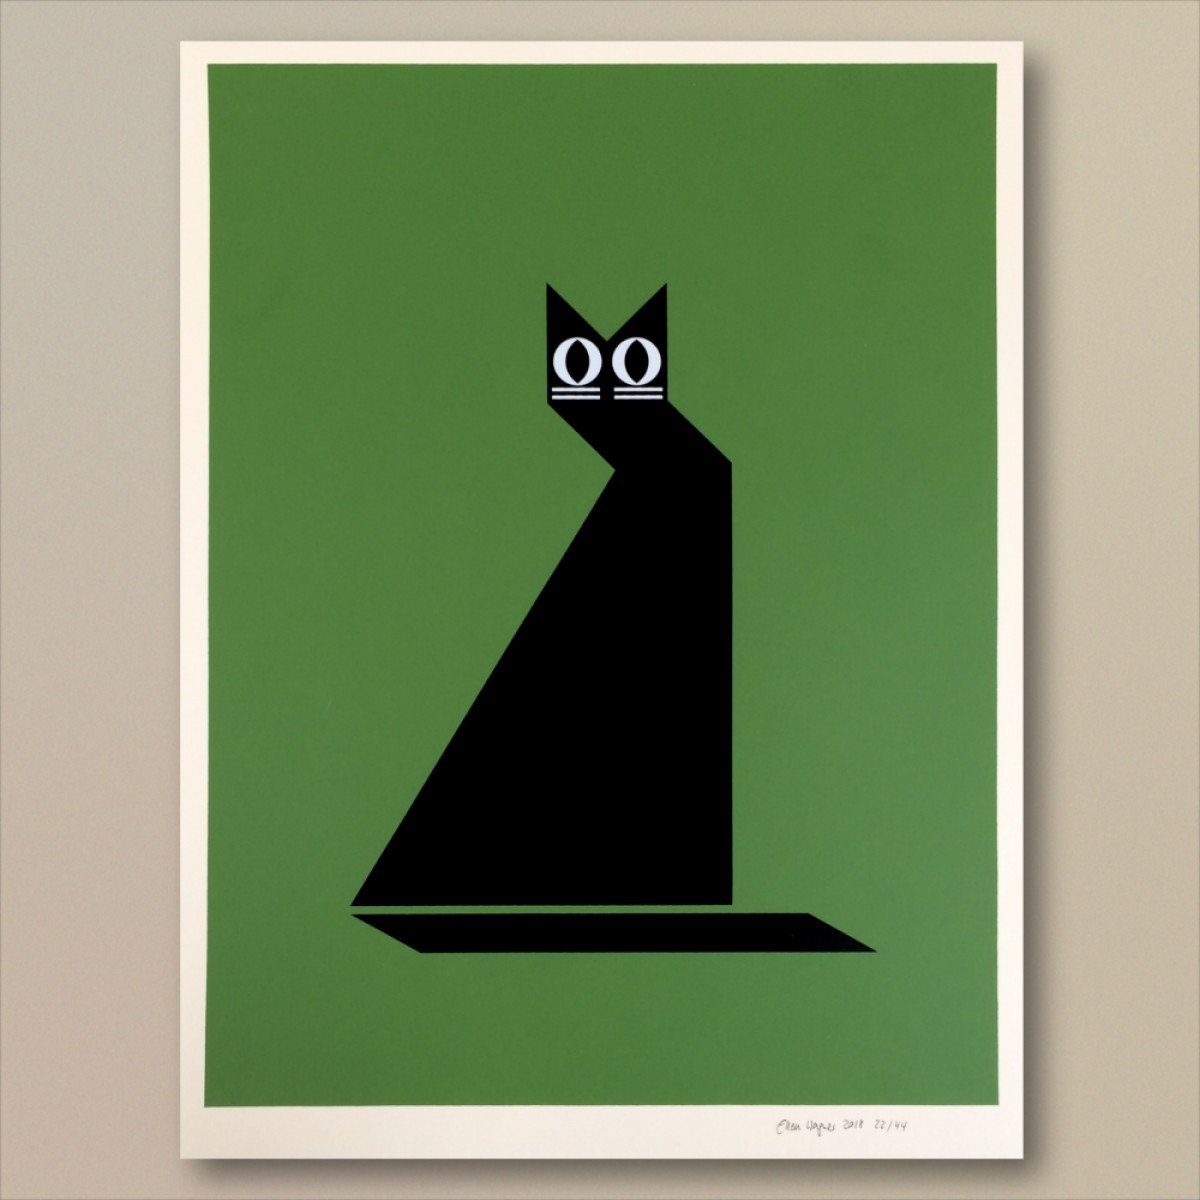 Print now - Riot later
Abstract Cat